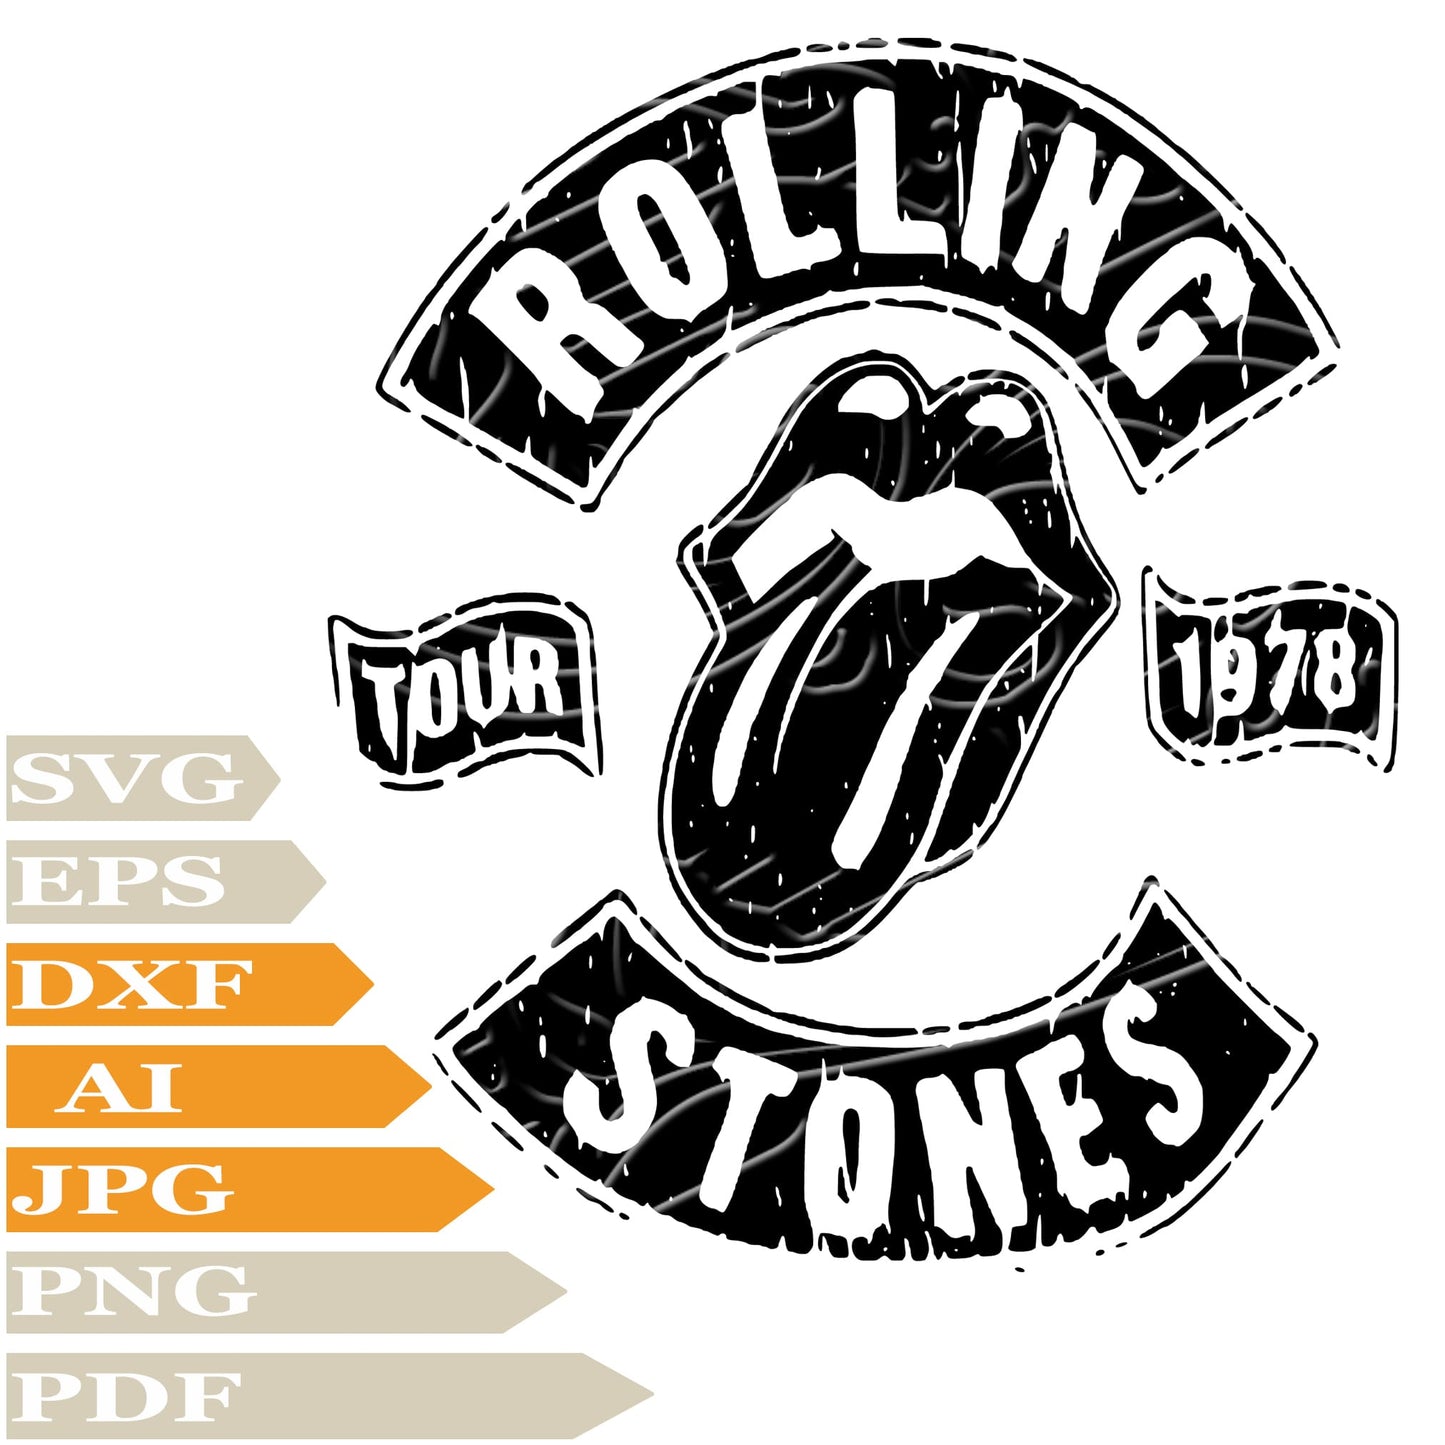 Rolling Stones, The Rolling Stones Logo Svg File, Image Cut, Png, For Tattoo, Silhouette, Digital Vector Download, Cut File, Clipart, For Cricut